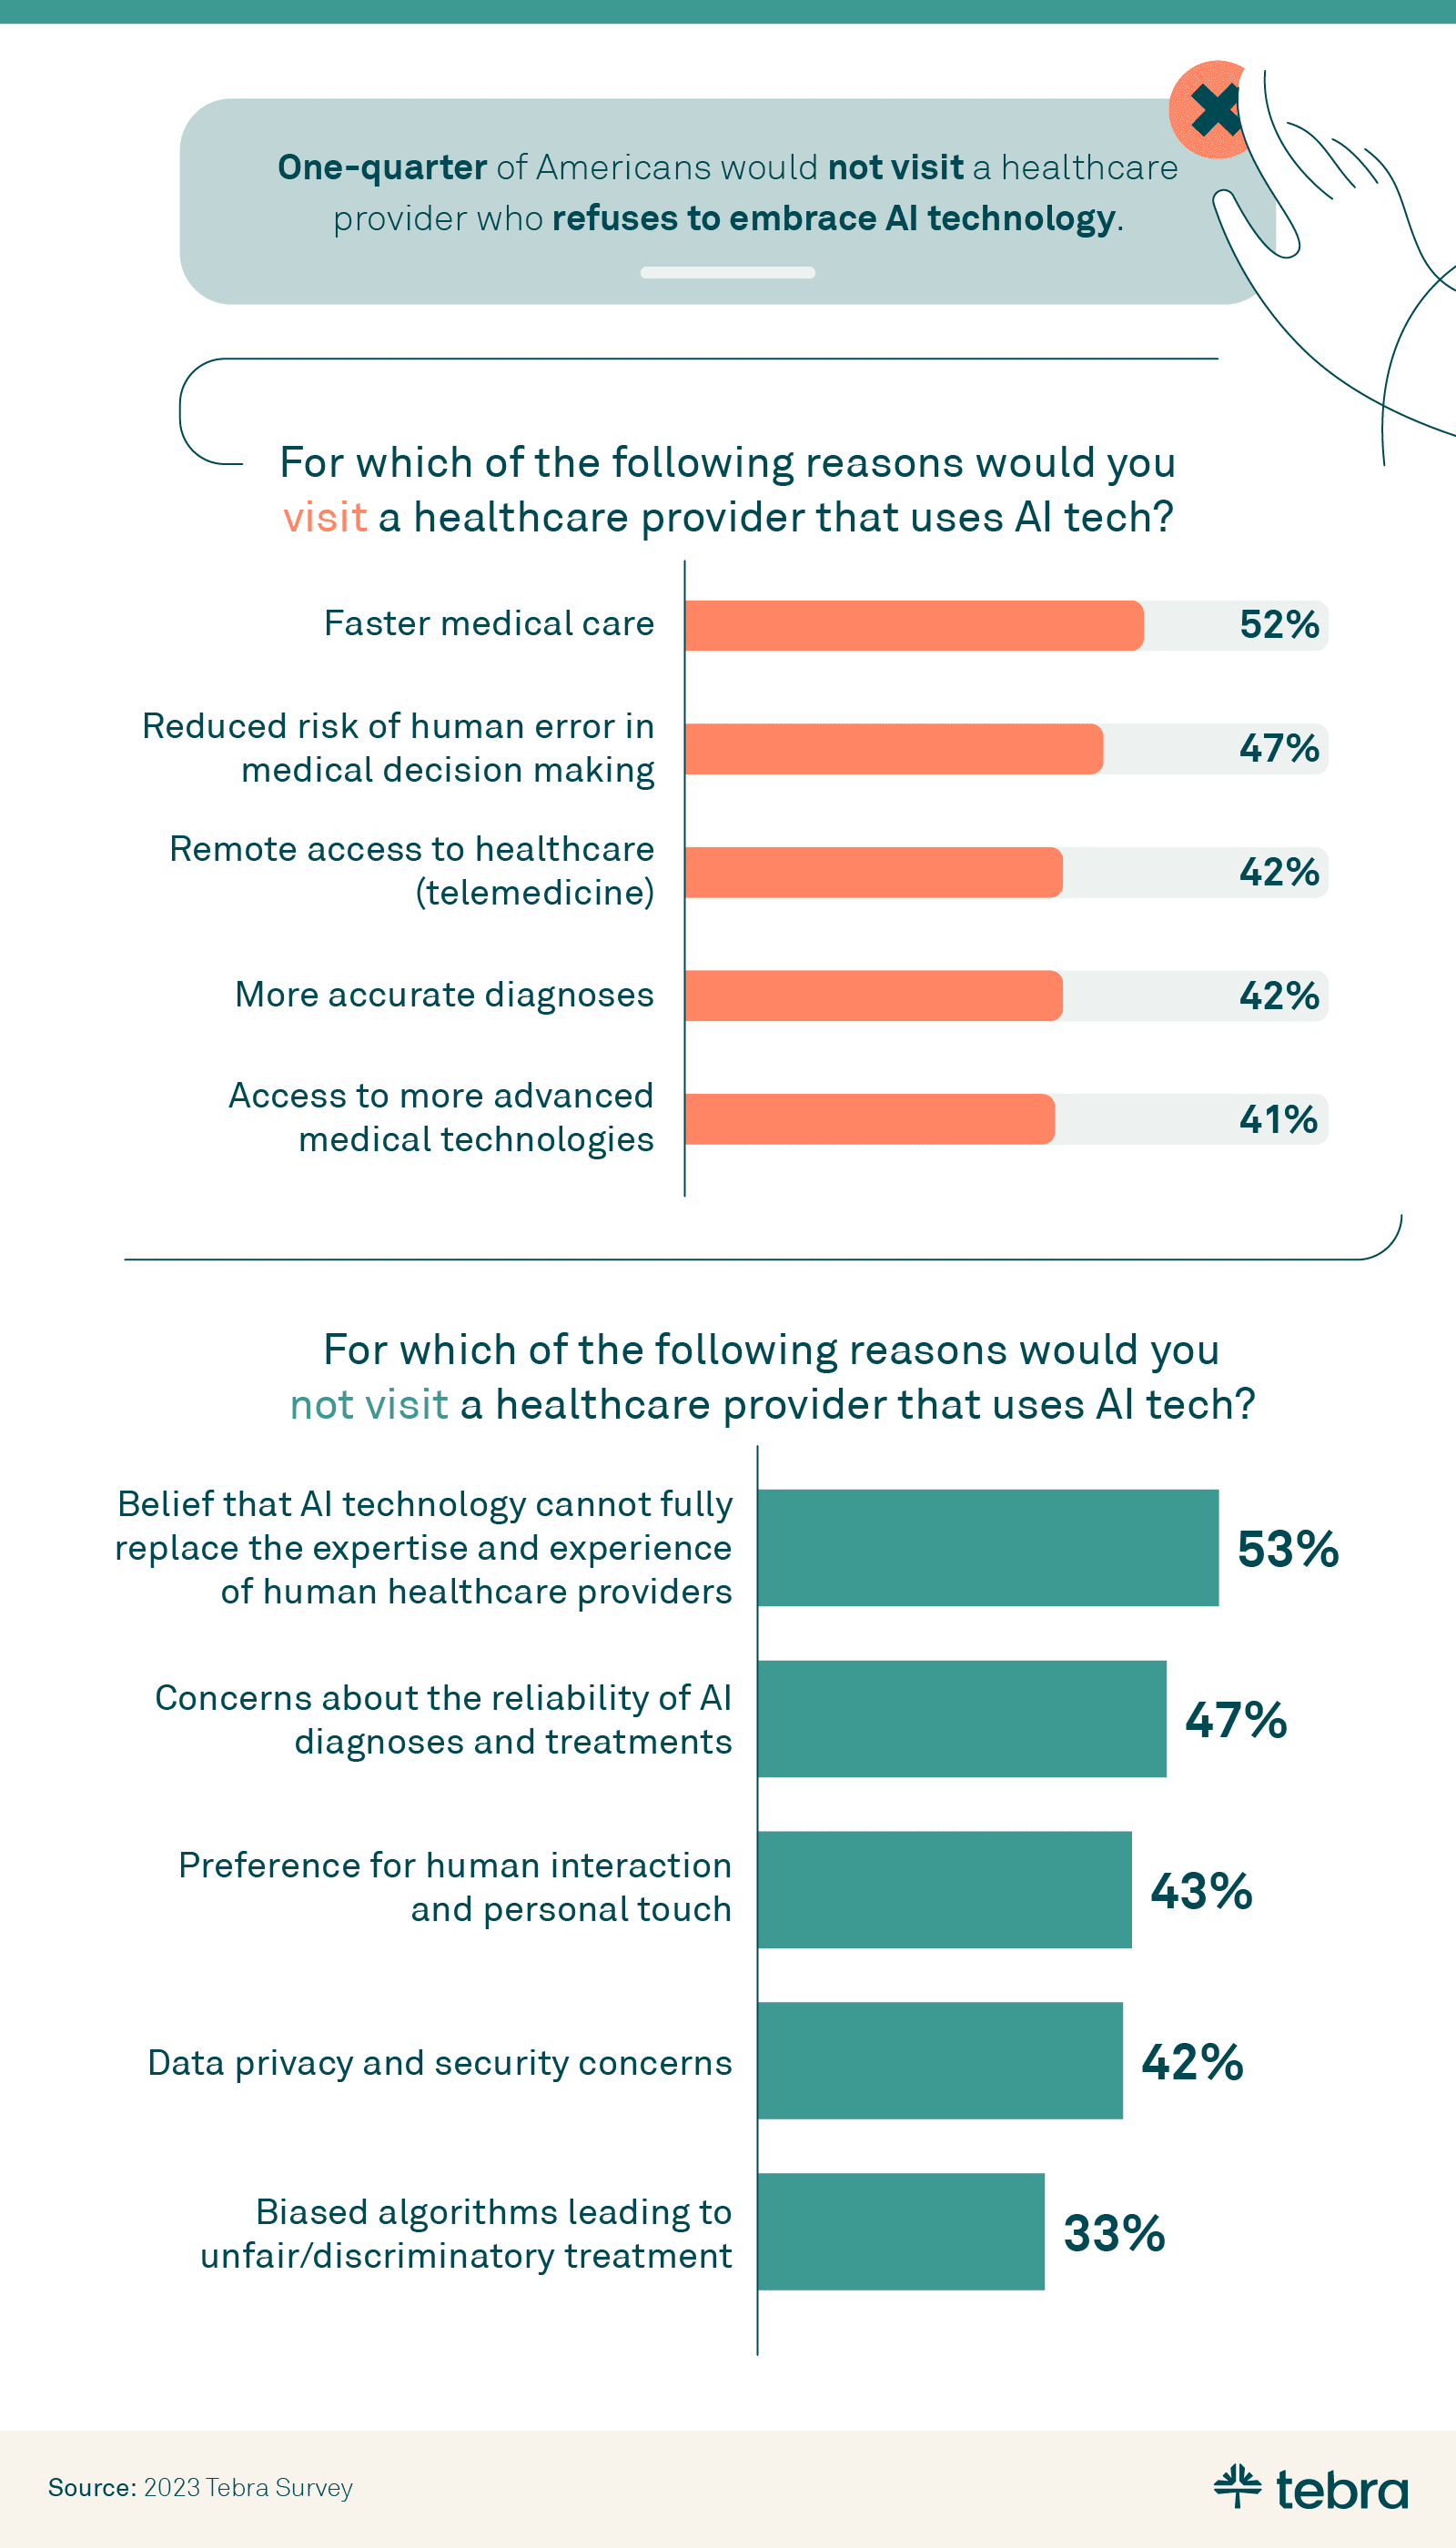 This is an infographic about Tebra research around the topic of AI in healthcare. One-quarter of our respondents said they wouldn’t visit a healthcare provider who refuses to embrace AI technology. The top reasons patients wanted AI in healthcare were faster medical care, less potential for human error, and remote healthcare access. 53% of Americans felt that AI can’t replace the experience of a human health expert, and 43% preferred human interaction and touch. Furthermore, 47% worried that AI may not yet be able to diagnose and treat health conditions accurately.